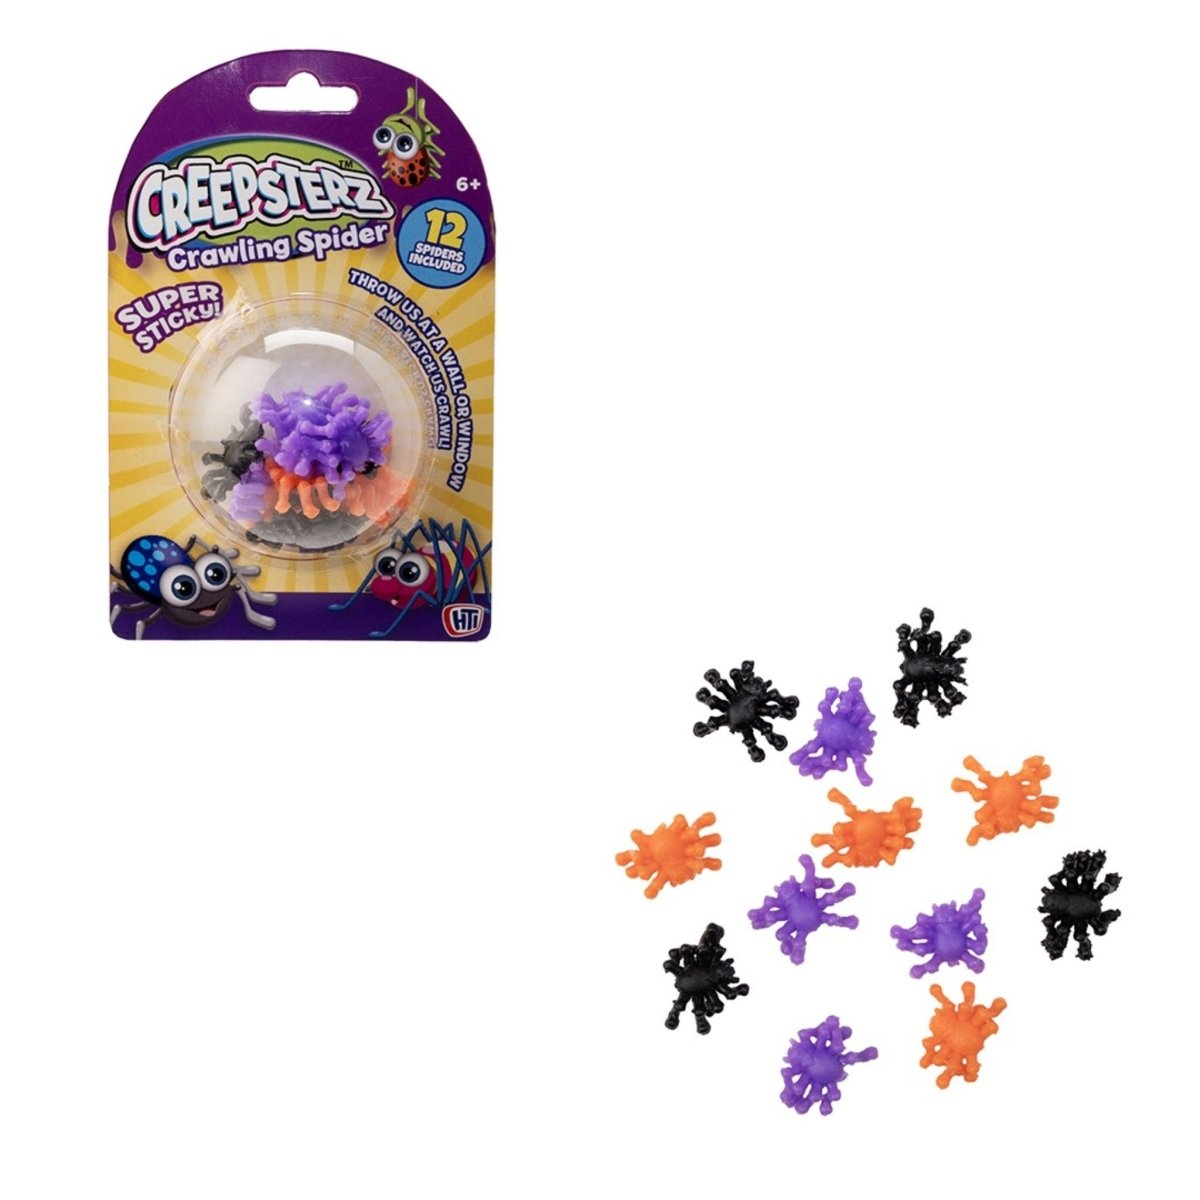 Creepsterz Sticky Crawling Spiders Pack - Kids Party Craft